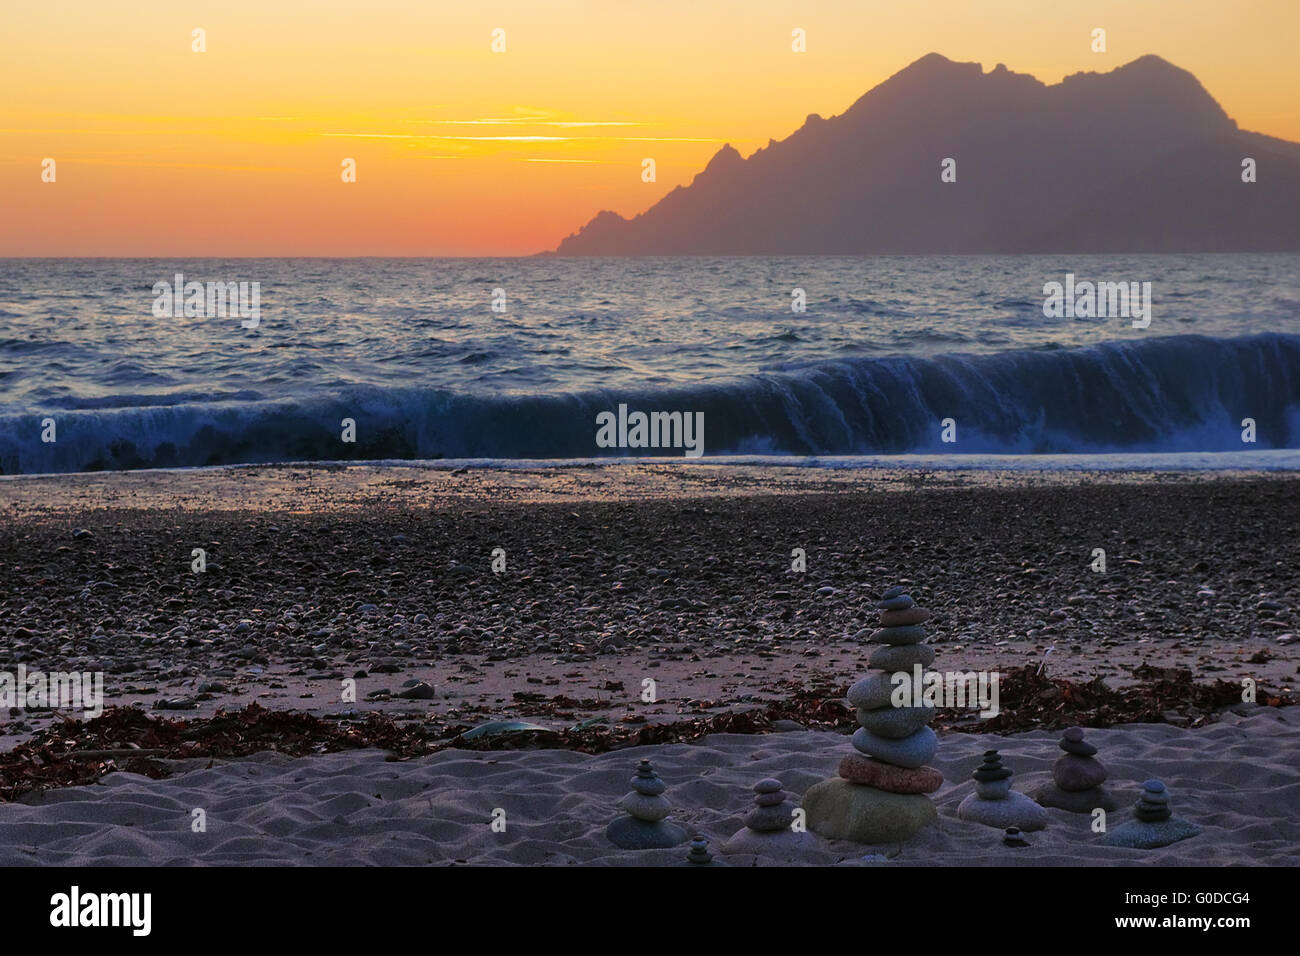 Surging billow in the afterglow at the beach Stock Photo